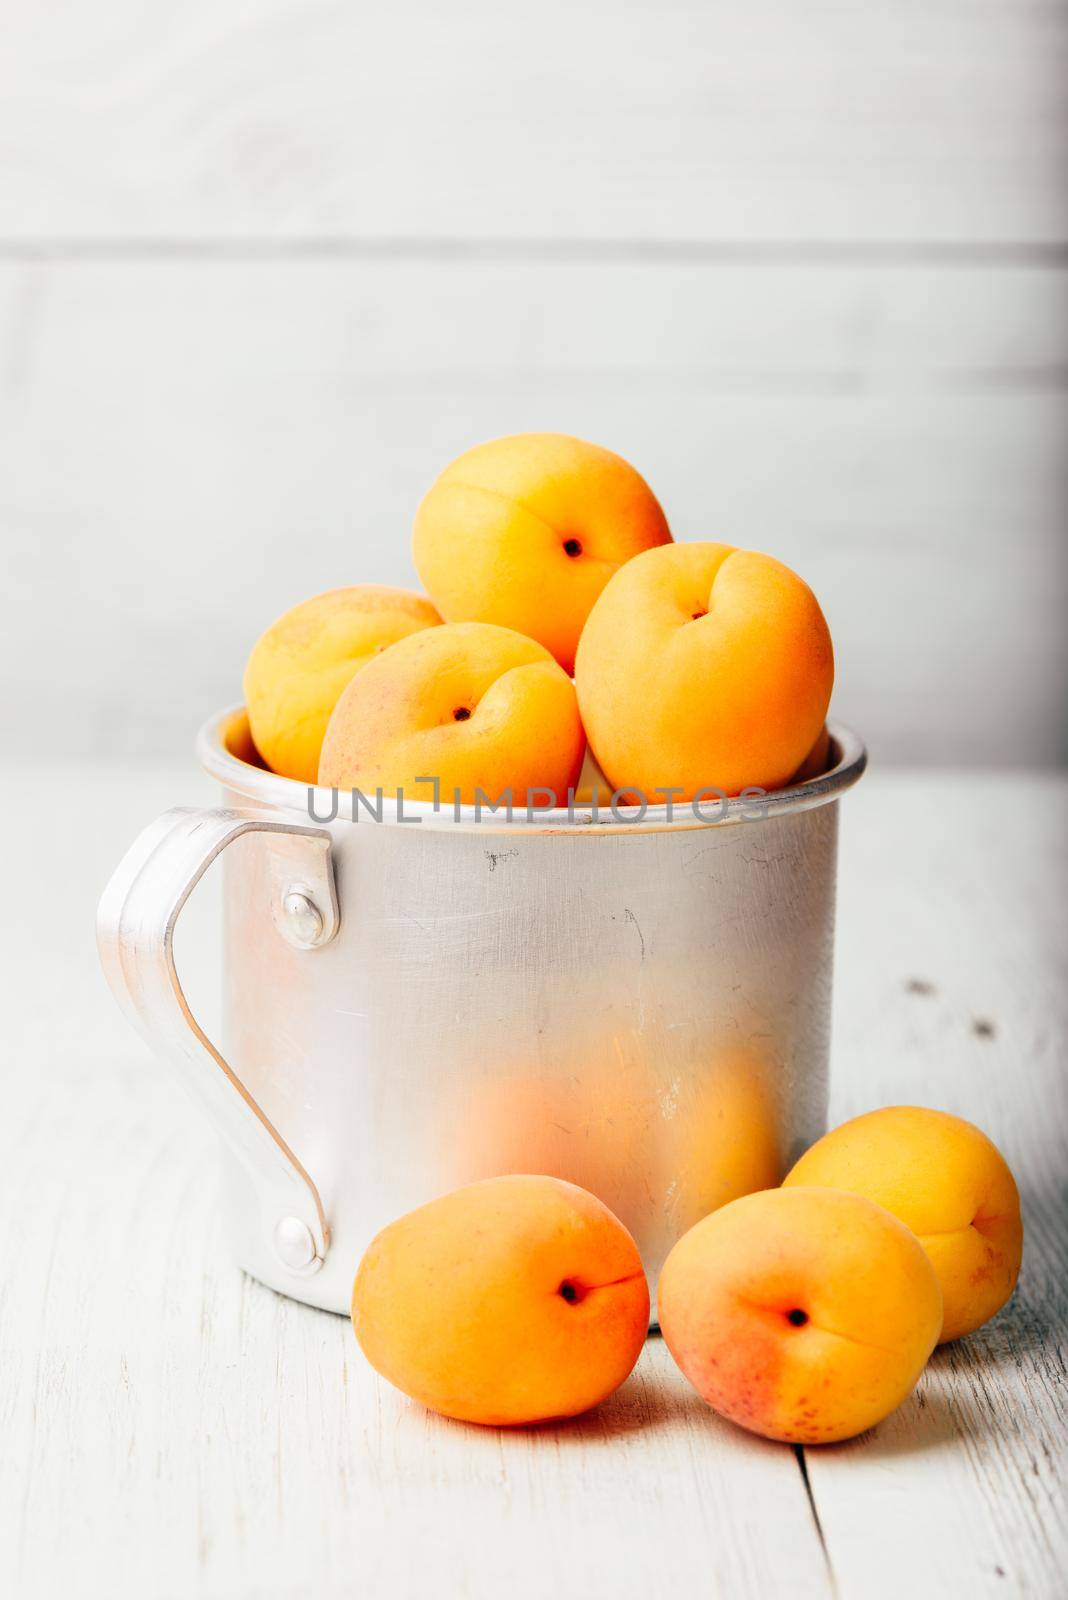 Mellow apricots in metal mug over light wooden surface